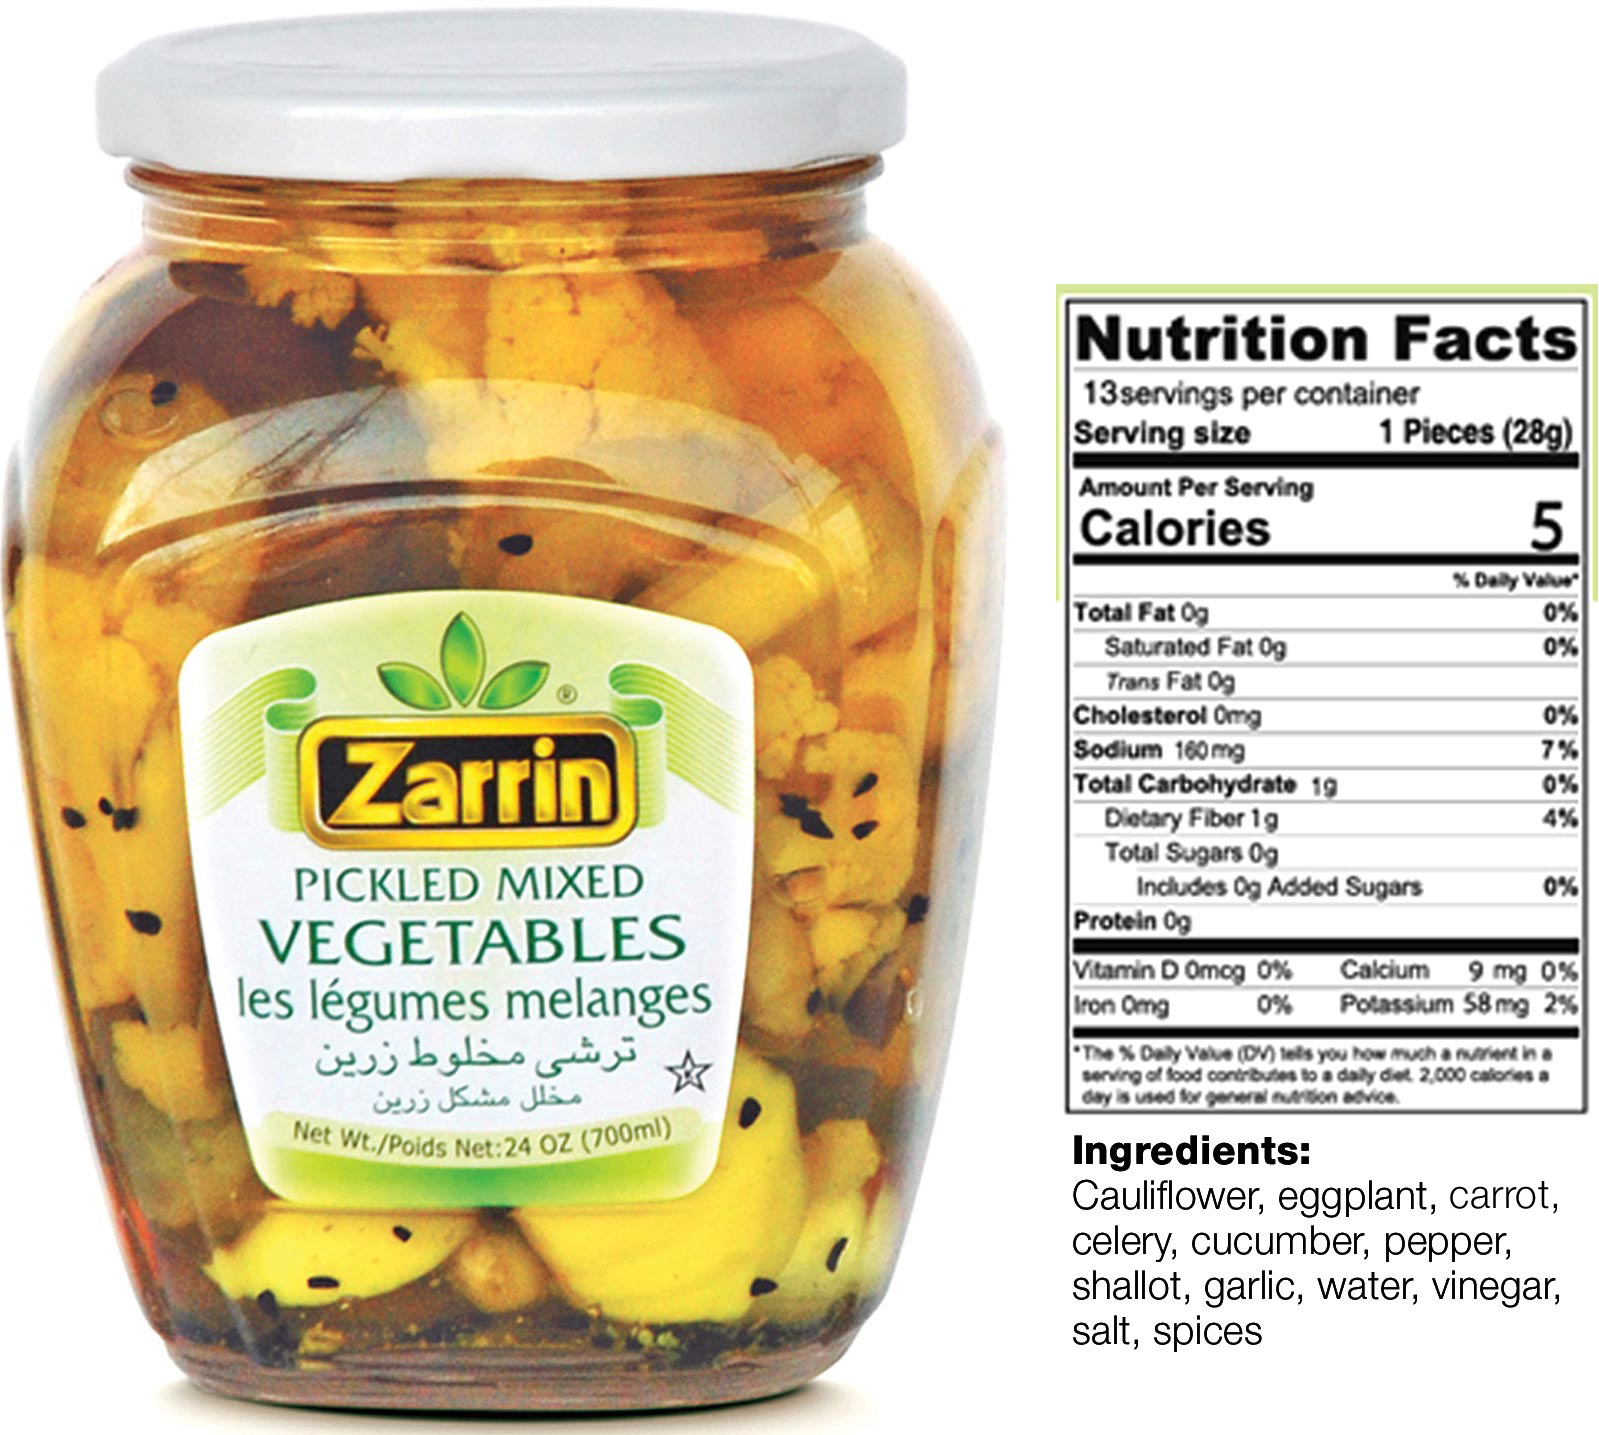 Zarrin pickled mixed vegetables in glass jar.